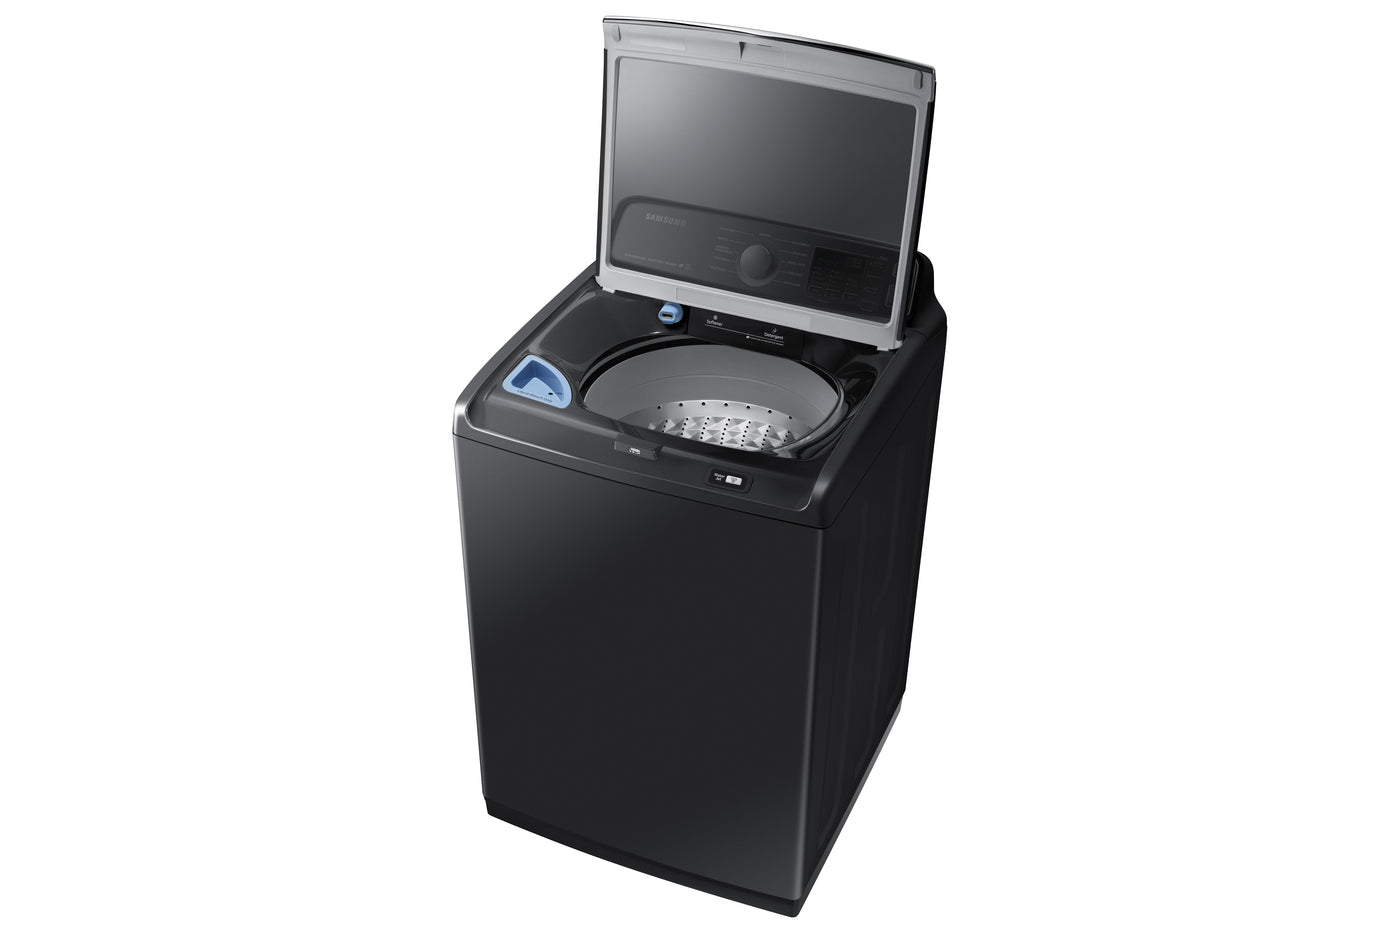 Samsung Black Stainless Steel Top Load Washer (5.8 Cu. Ft.) - WA50T7455AV/A4